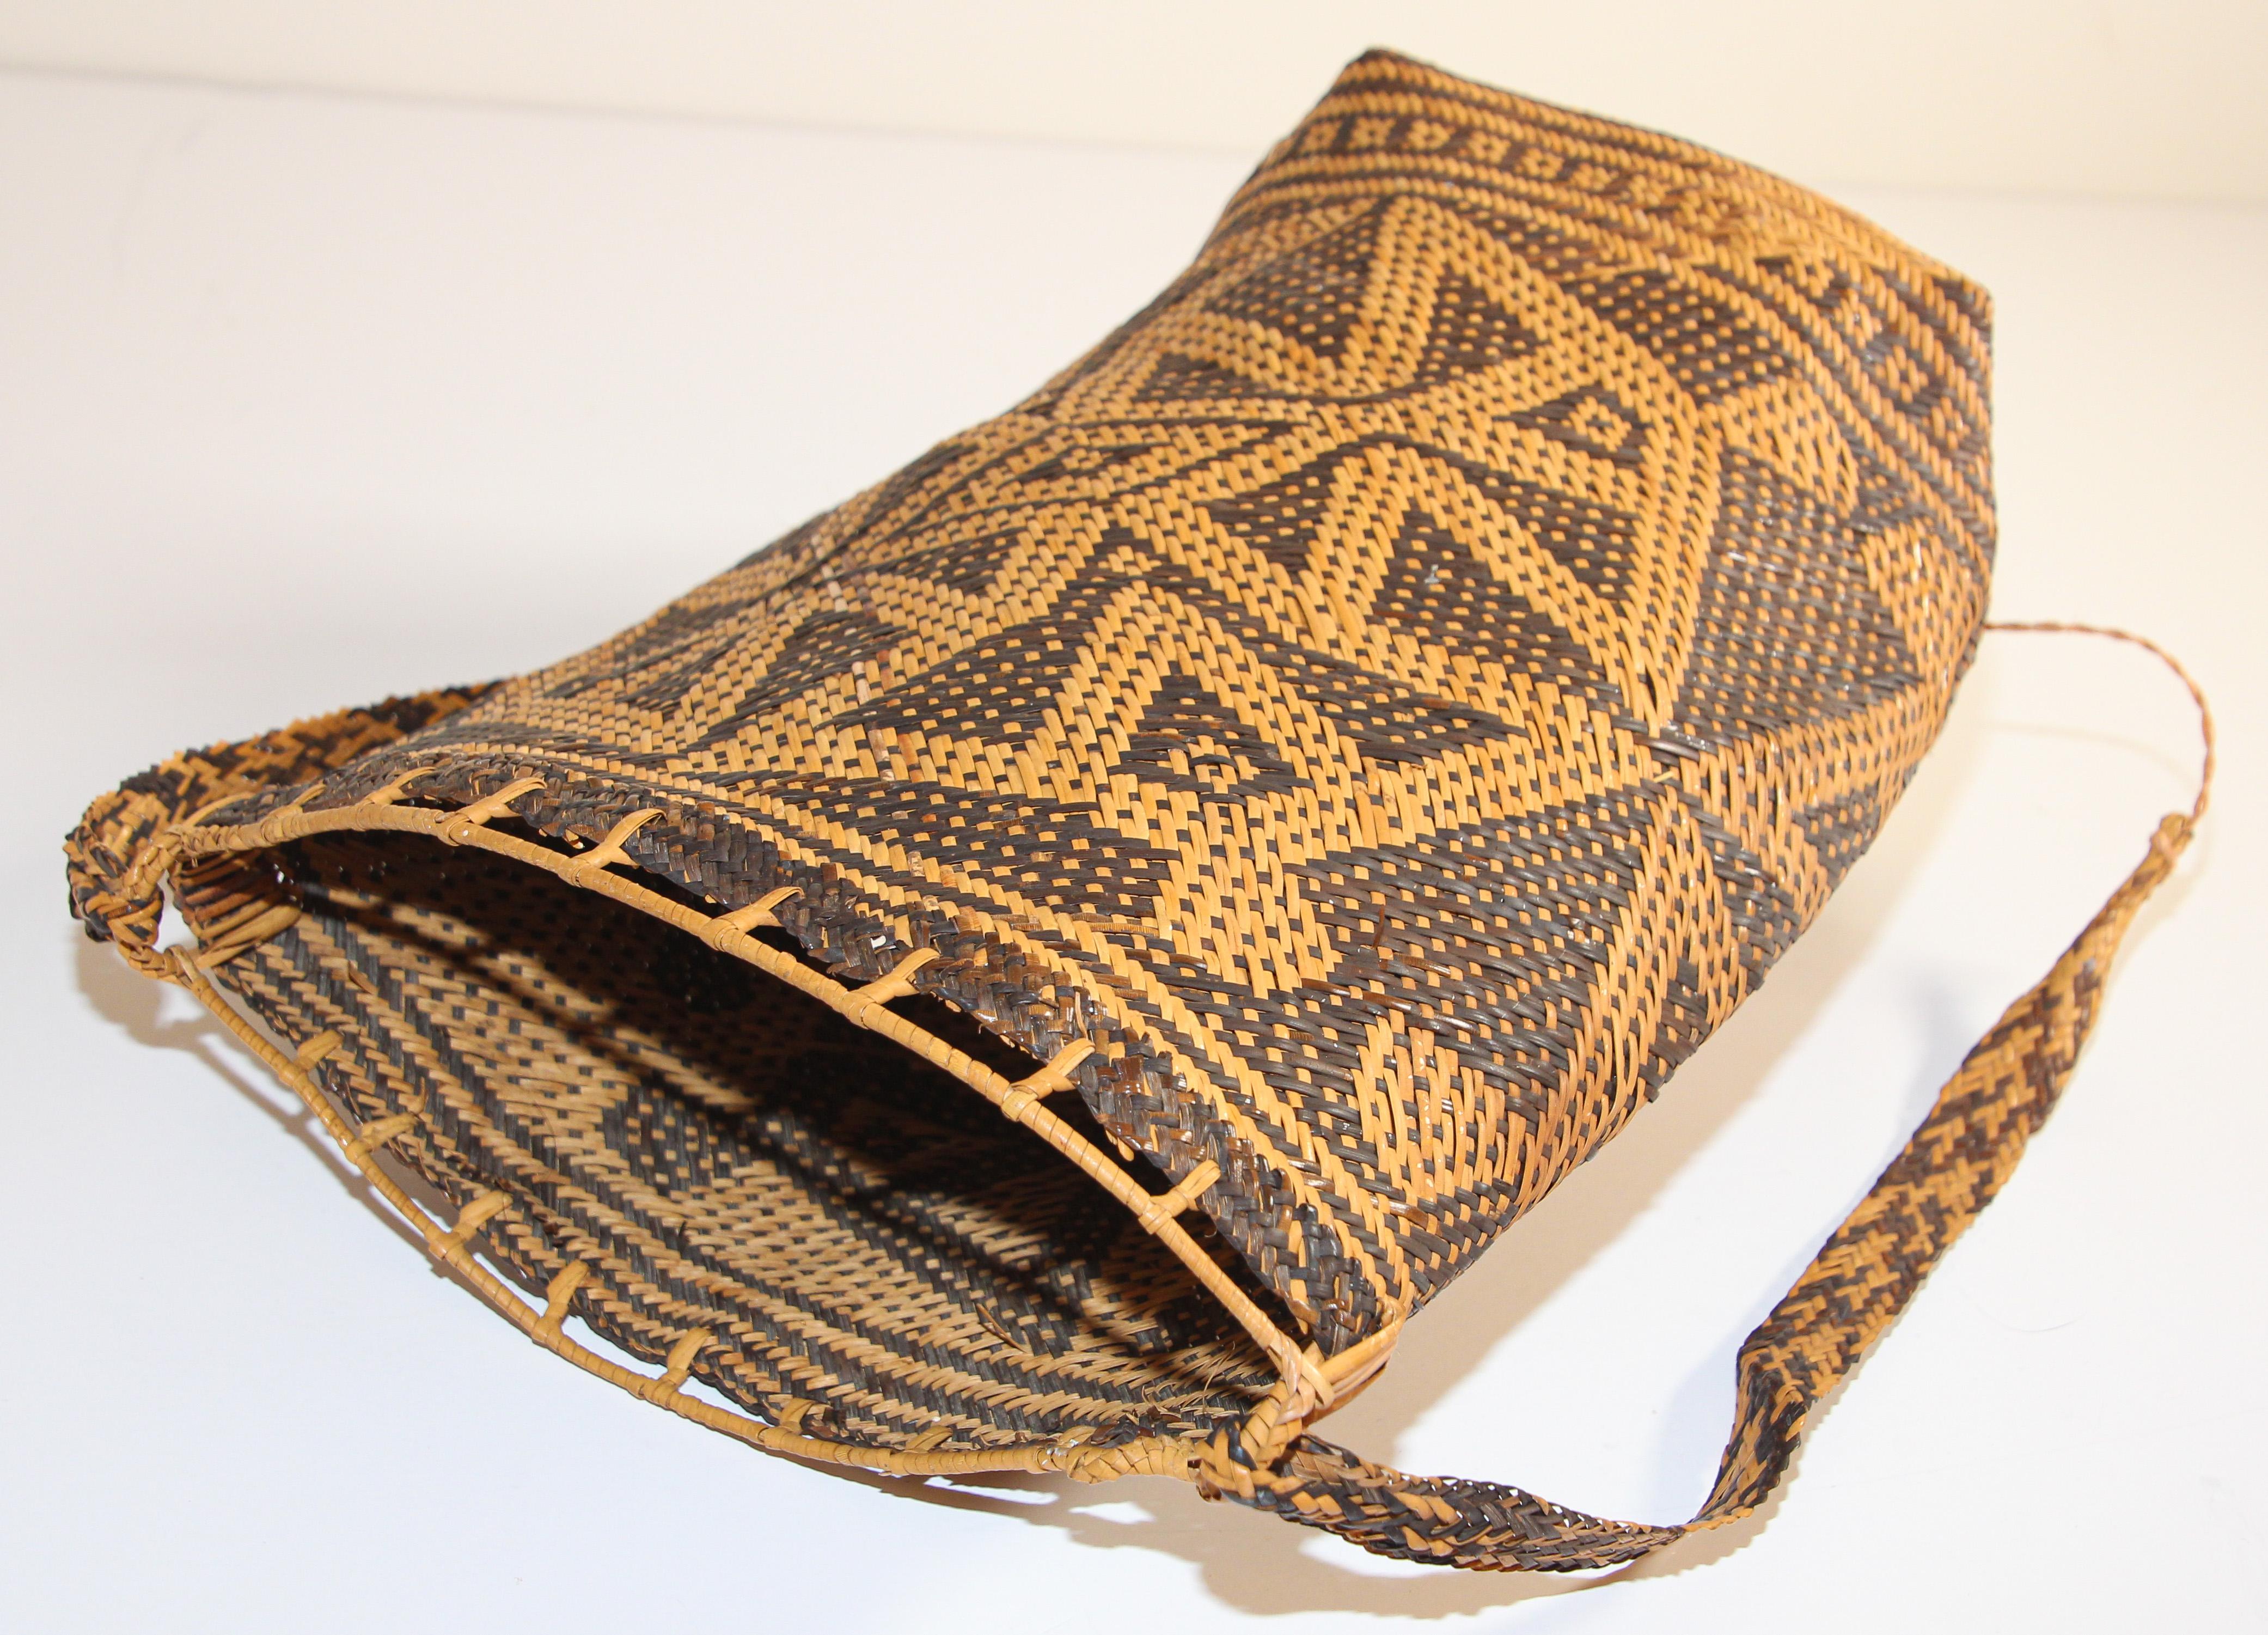 Hand-Crafted Traditional Ethnic Woven Ajat Basket Borneo Indonesia For Sale